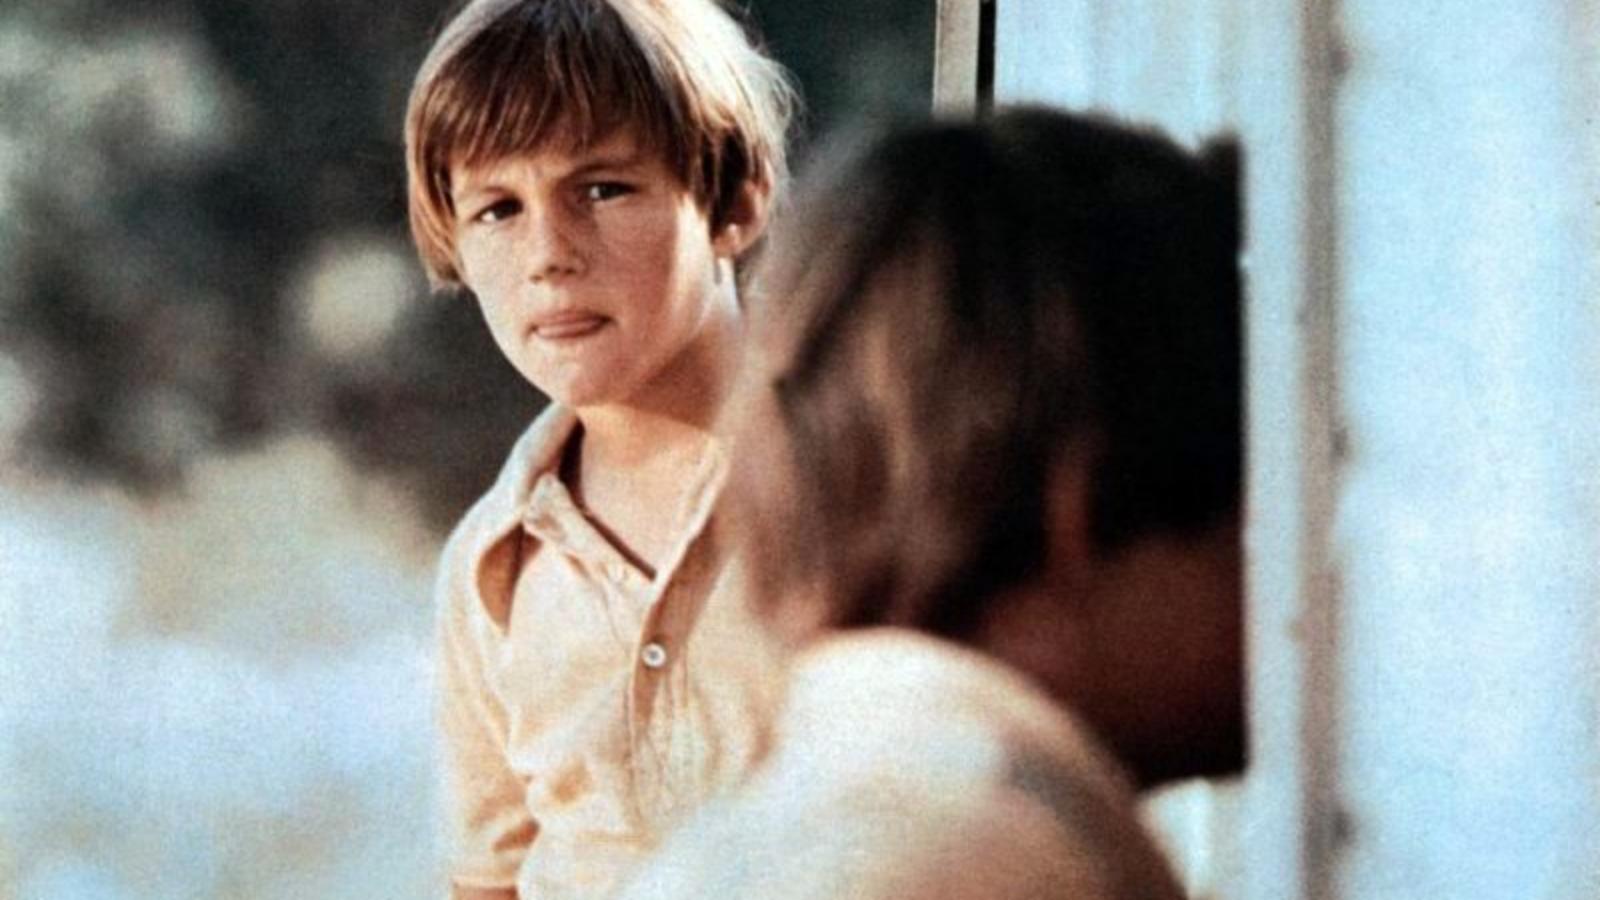 10 Creepy Kids in Horror Movies Who Still Haunt Our Nightmares - image 6